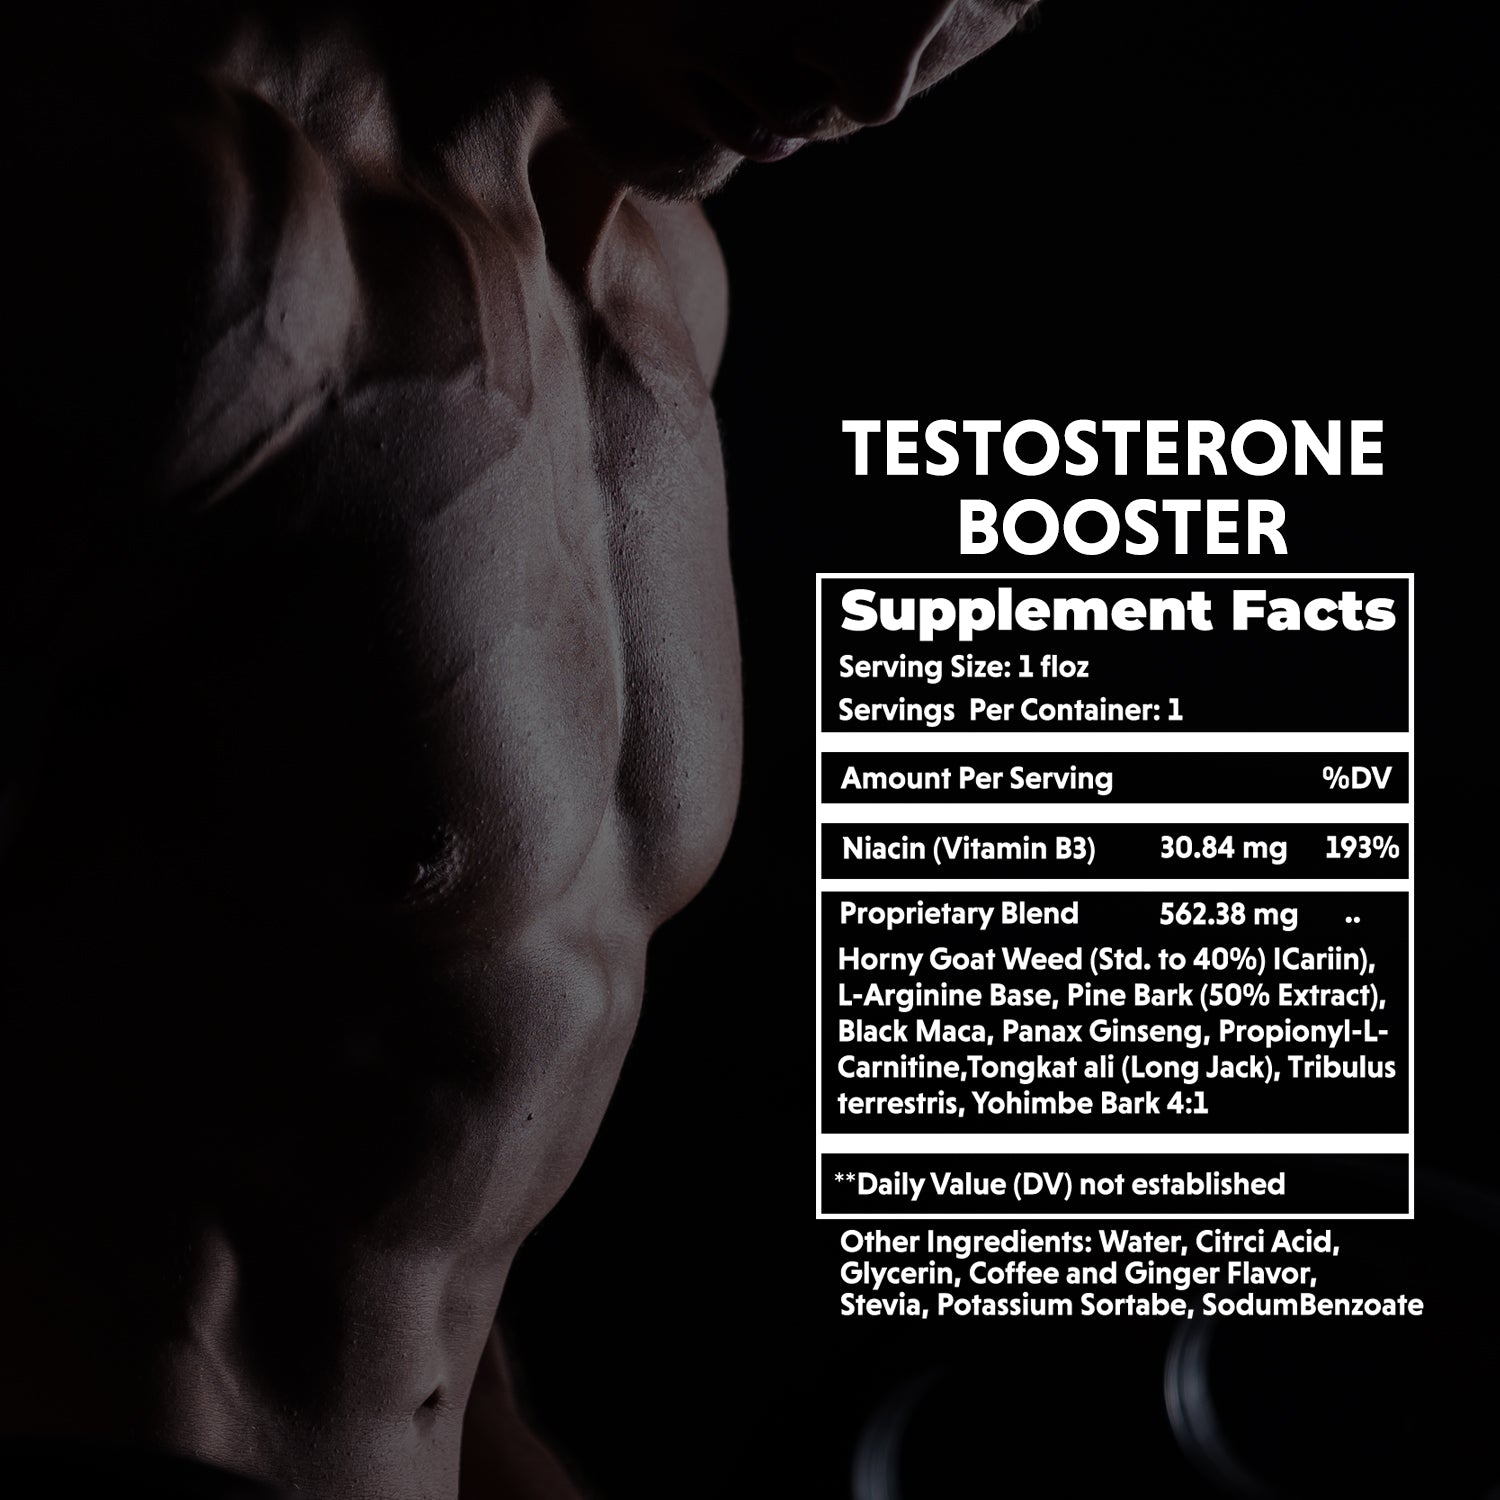 T600 Male Testosterone Booster, Natural Energy and Strength Booster, 1 fl oz. Liquid Shot - Coffee Flavor